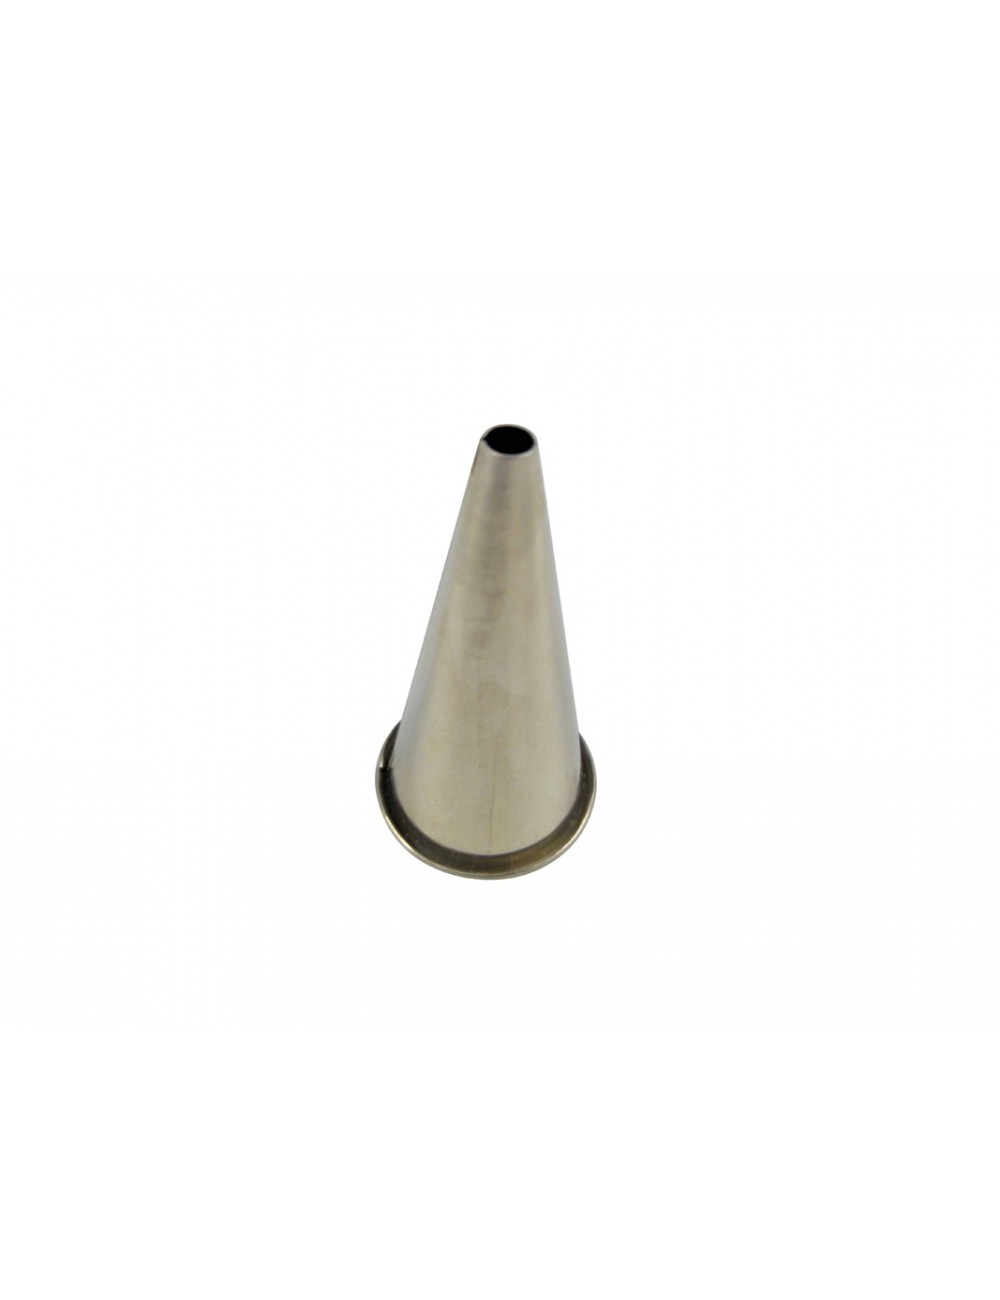 PLAIN NOZZLE - STAINLESS STEEL